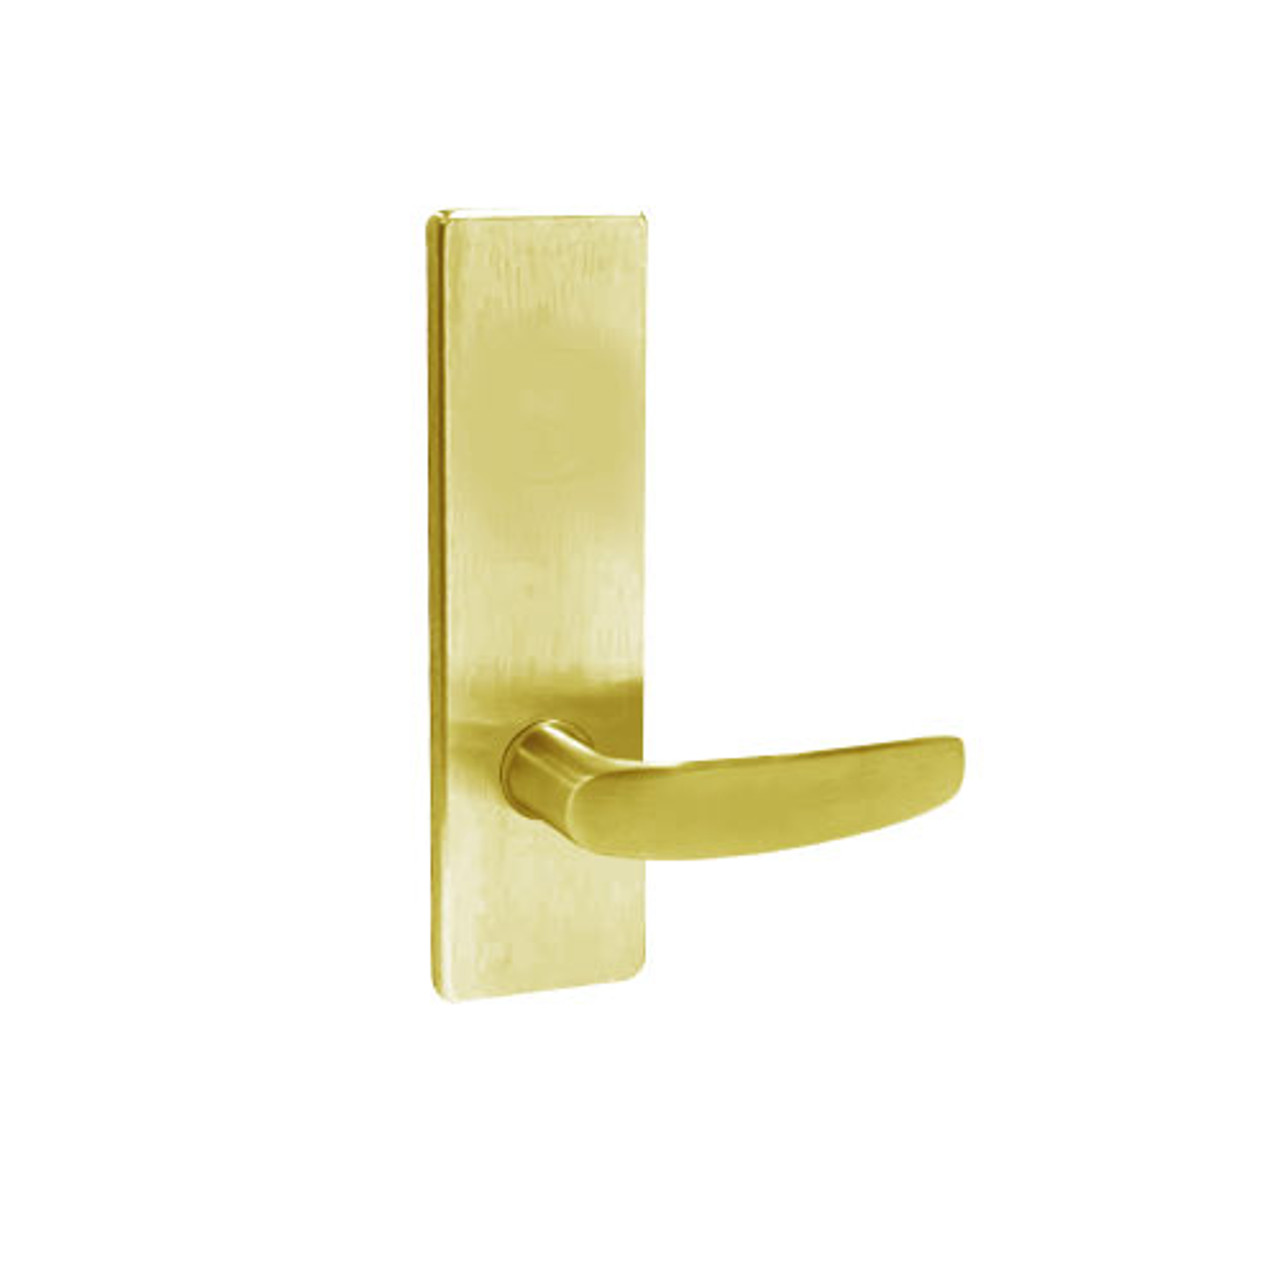 MA12-AN-606 Falcon Mortise Locks MA Series Half Dummy AN Lever with Escutcheon Style in Satin Brass Finish